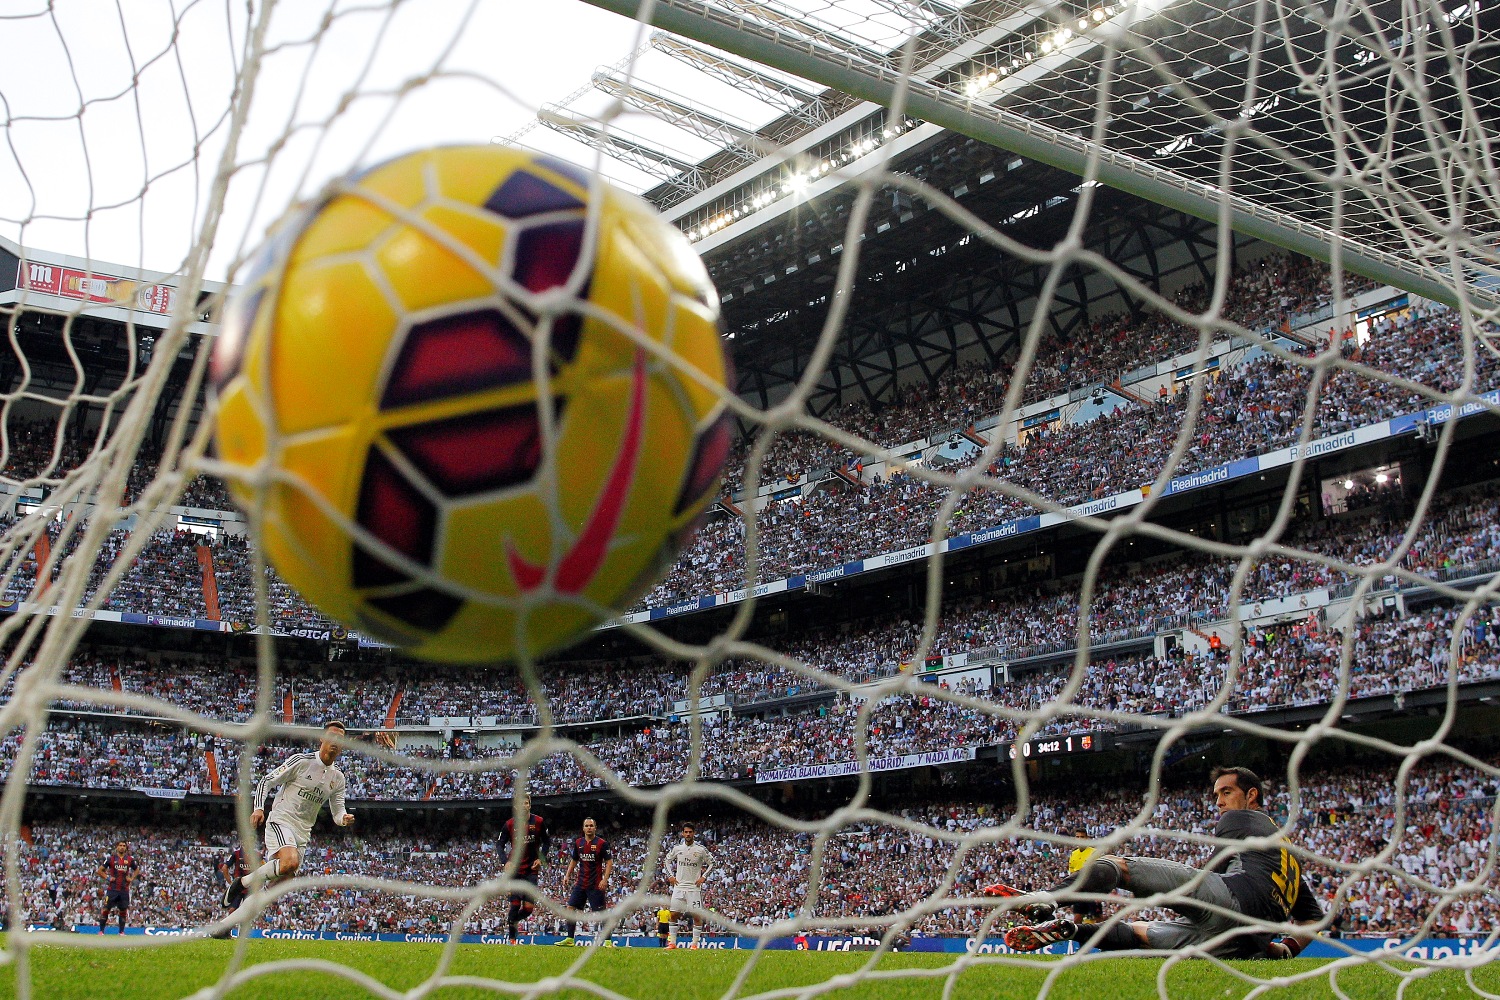 ‘Clásico’ will be guarded by about 3,000 agents